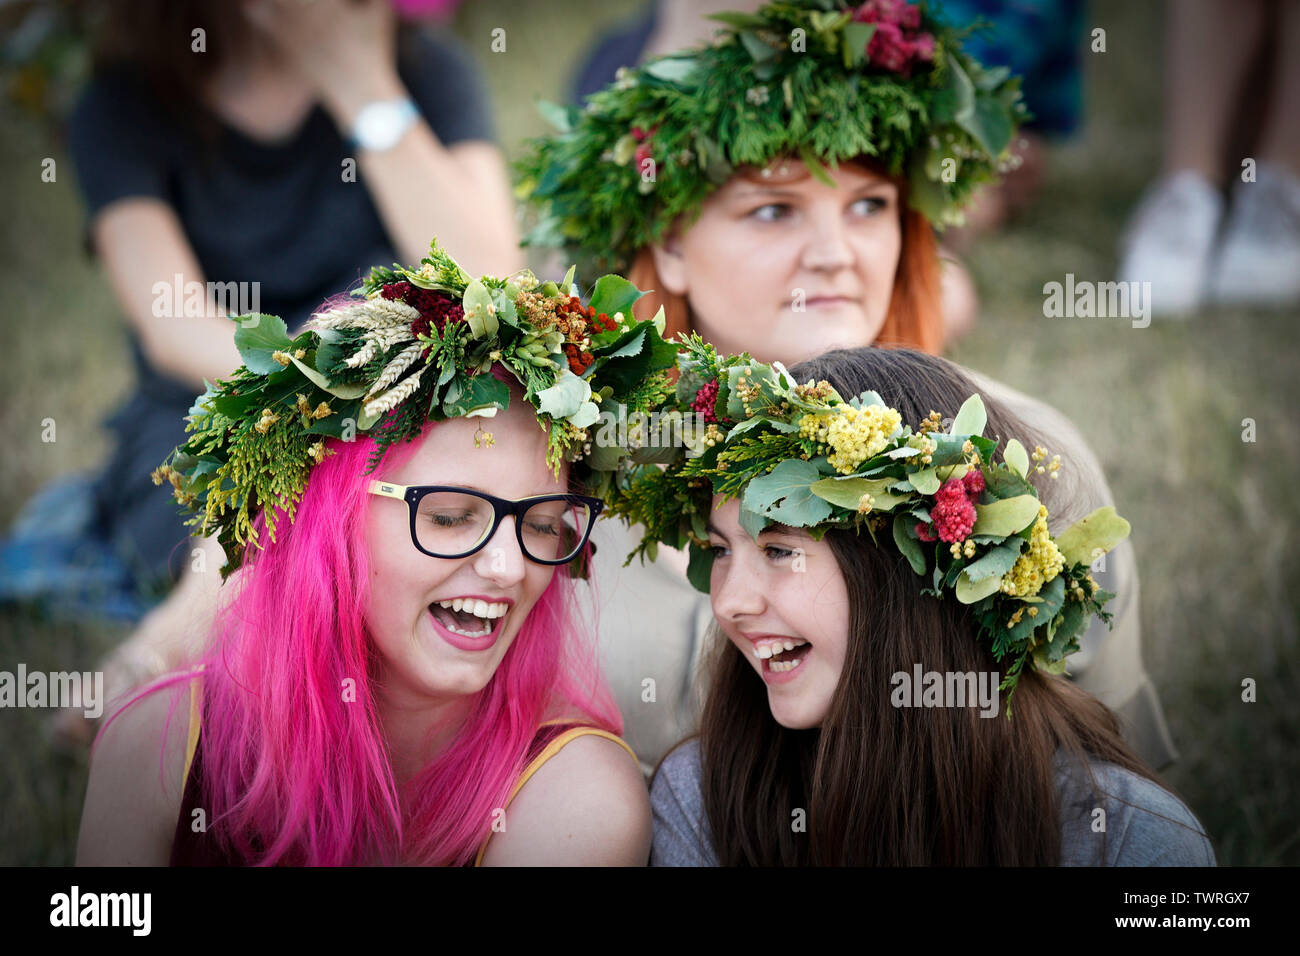 Warsaw, Poland. 22nd June, 2019. People wearing flower wreaths participate  in Wianki celebrations in Warsaw, Poland, on June 22, 2019. Wianki is a  tradition of floating handmade wreaths down the river to